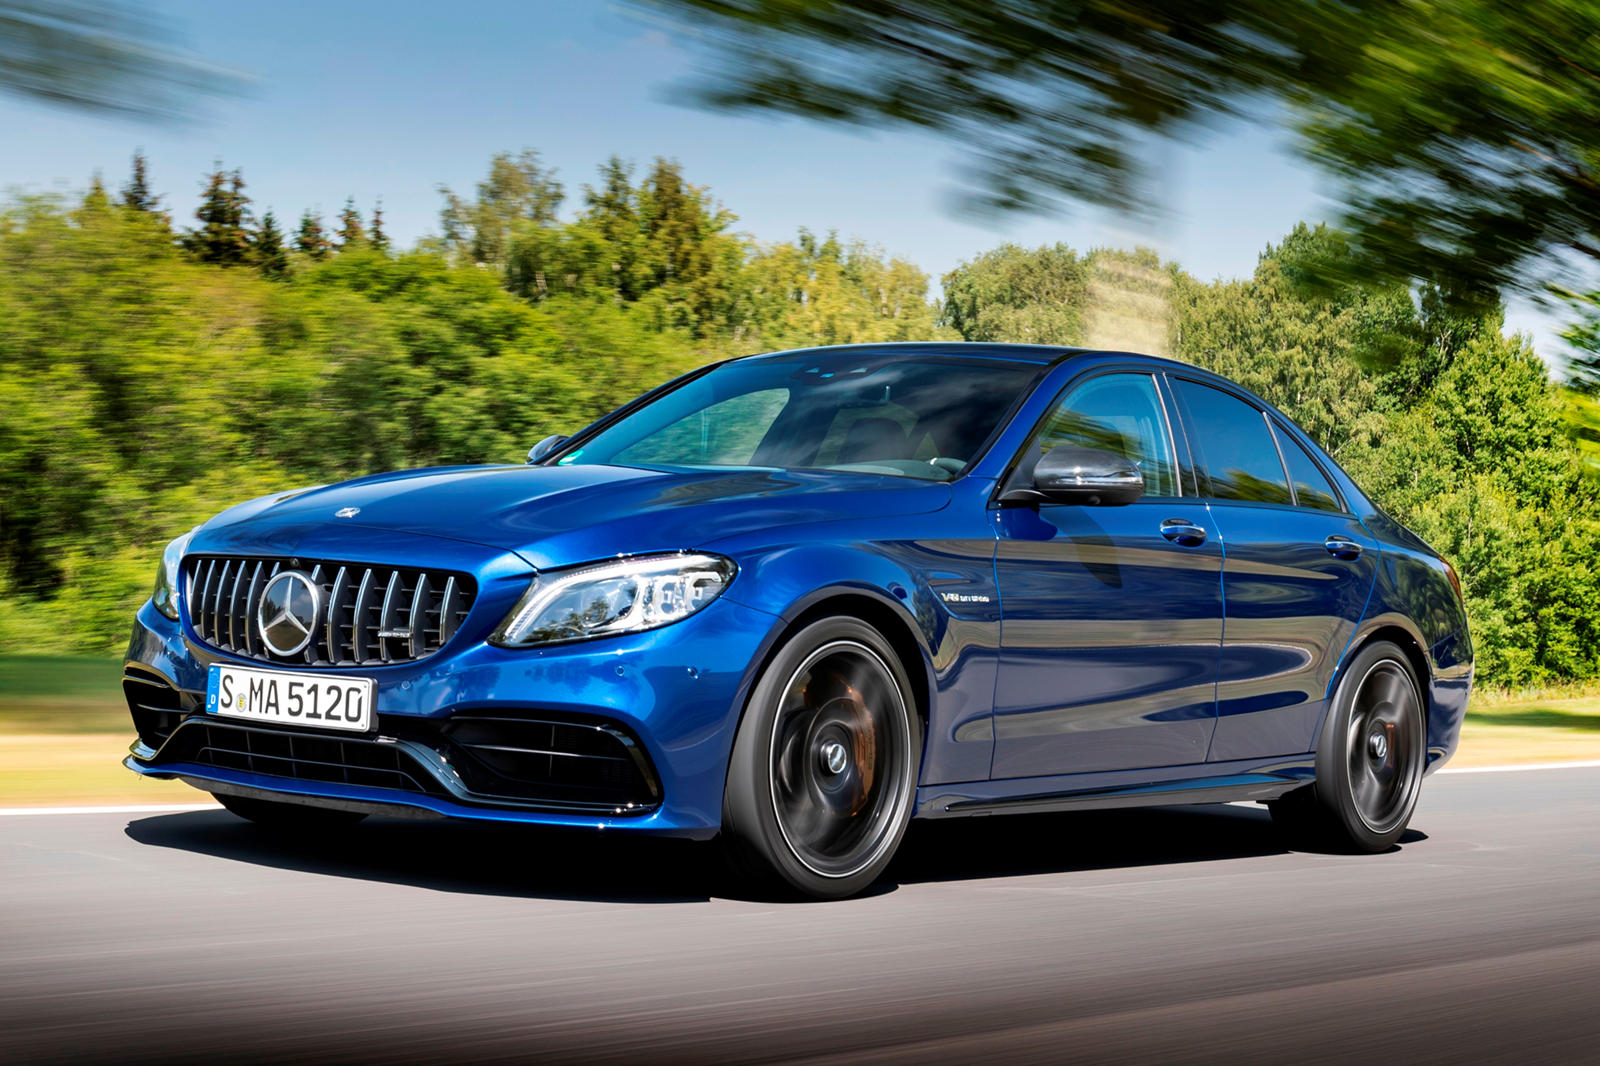 More Details About Mercedes' Bold New 2022 AMG C63 | CarBuzz